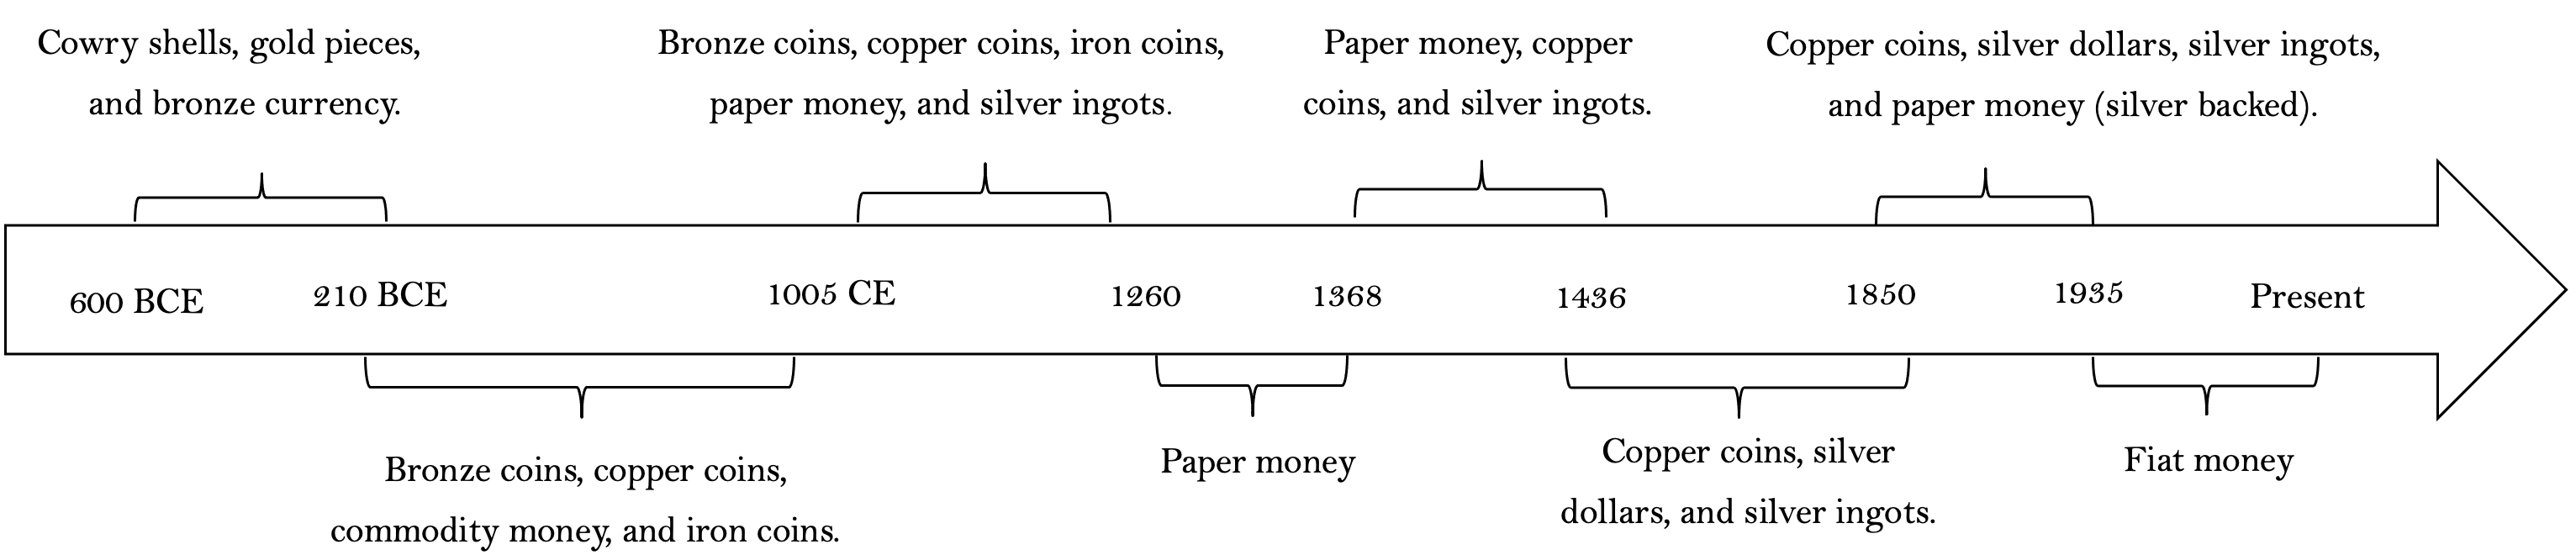 Figure 1 The evolution of currency formats from 600 BCE to the present